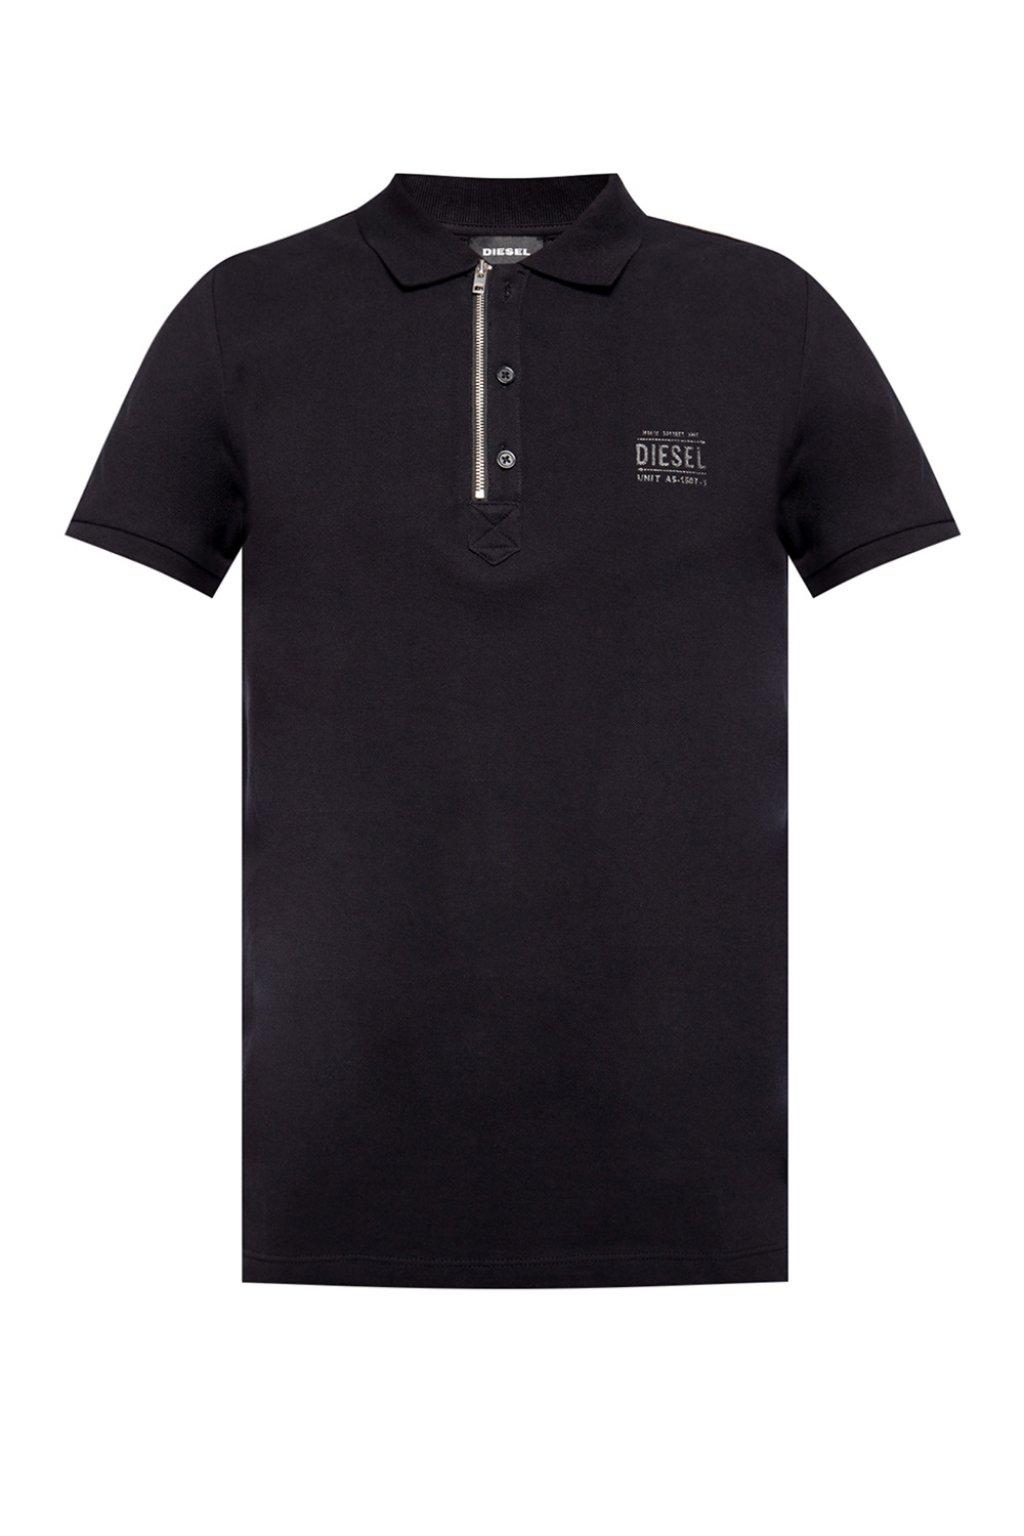 DIESEL Cotton Logo-printed Polo Shirt in Black for Men - Lyst